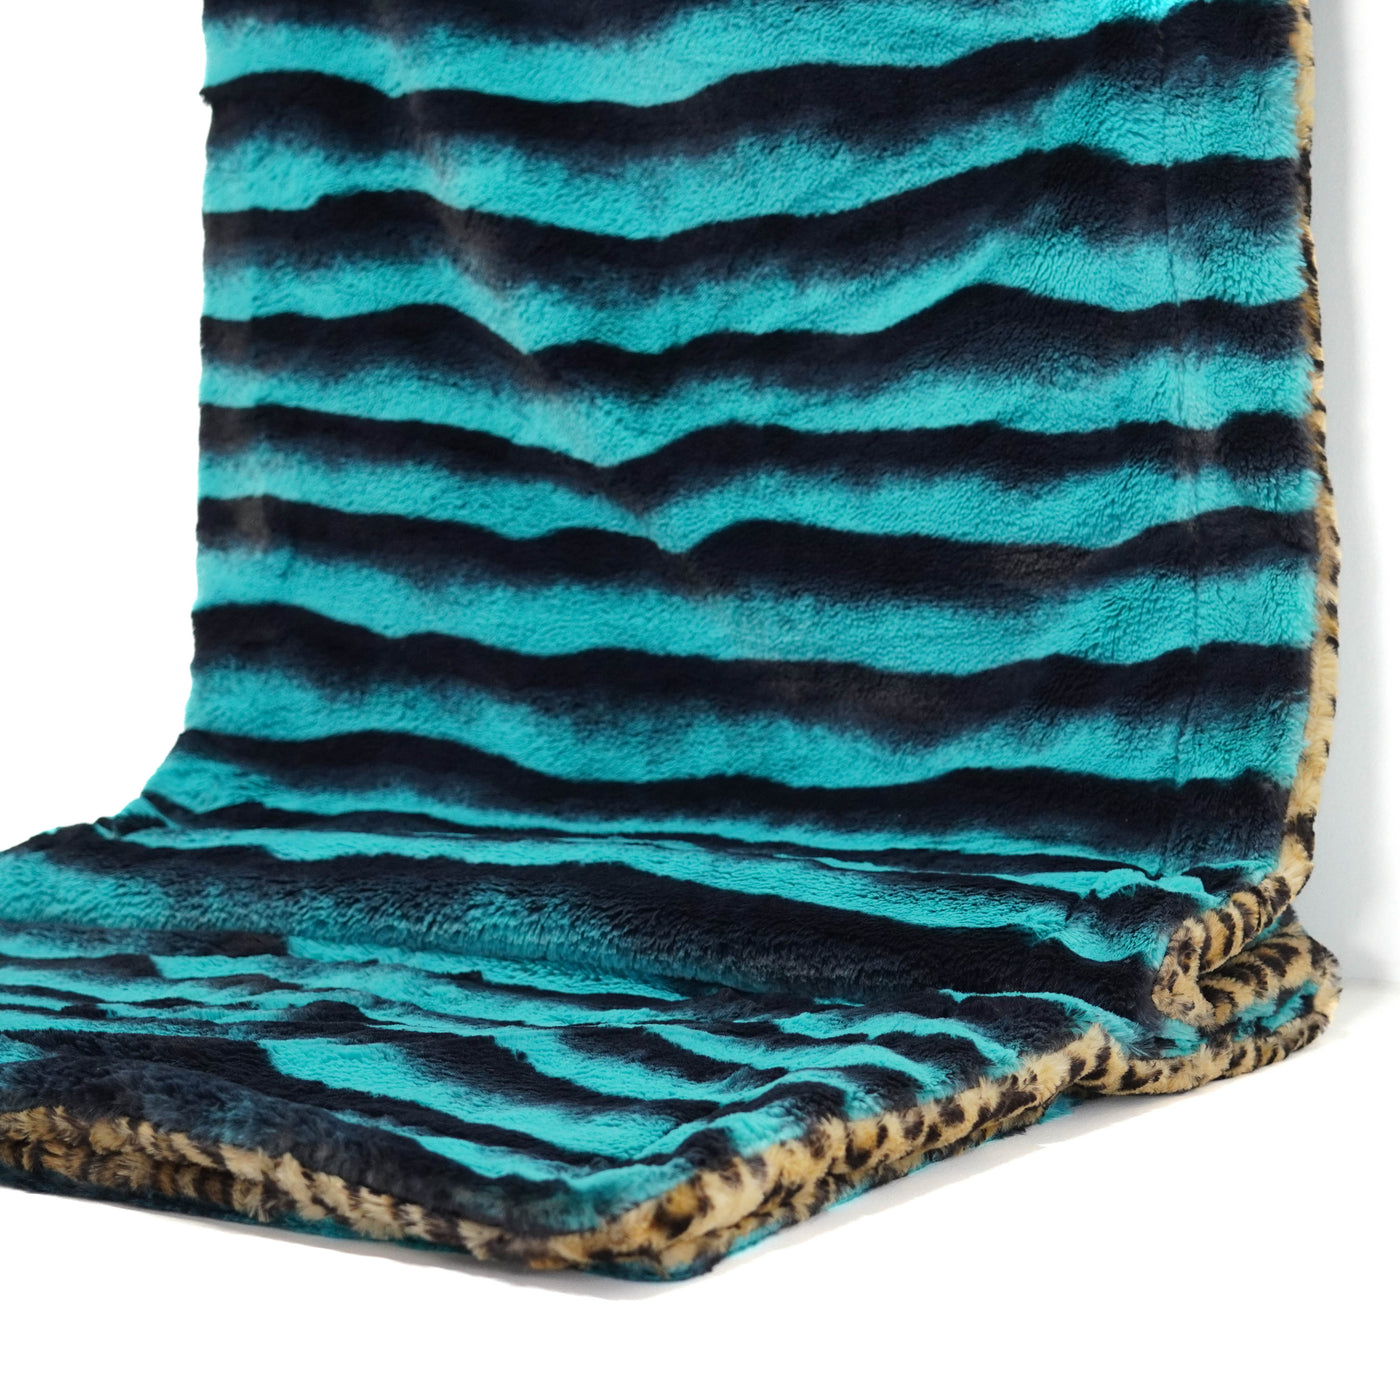 Adult Sized Minky Blanket - Sand Leopard w/ Tanzanite Chinchilla-Adult Sized Minky Blanket-Western-Cowhide-Bags-Handmade-Products-Gifts-Dancing Cactus Designs